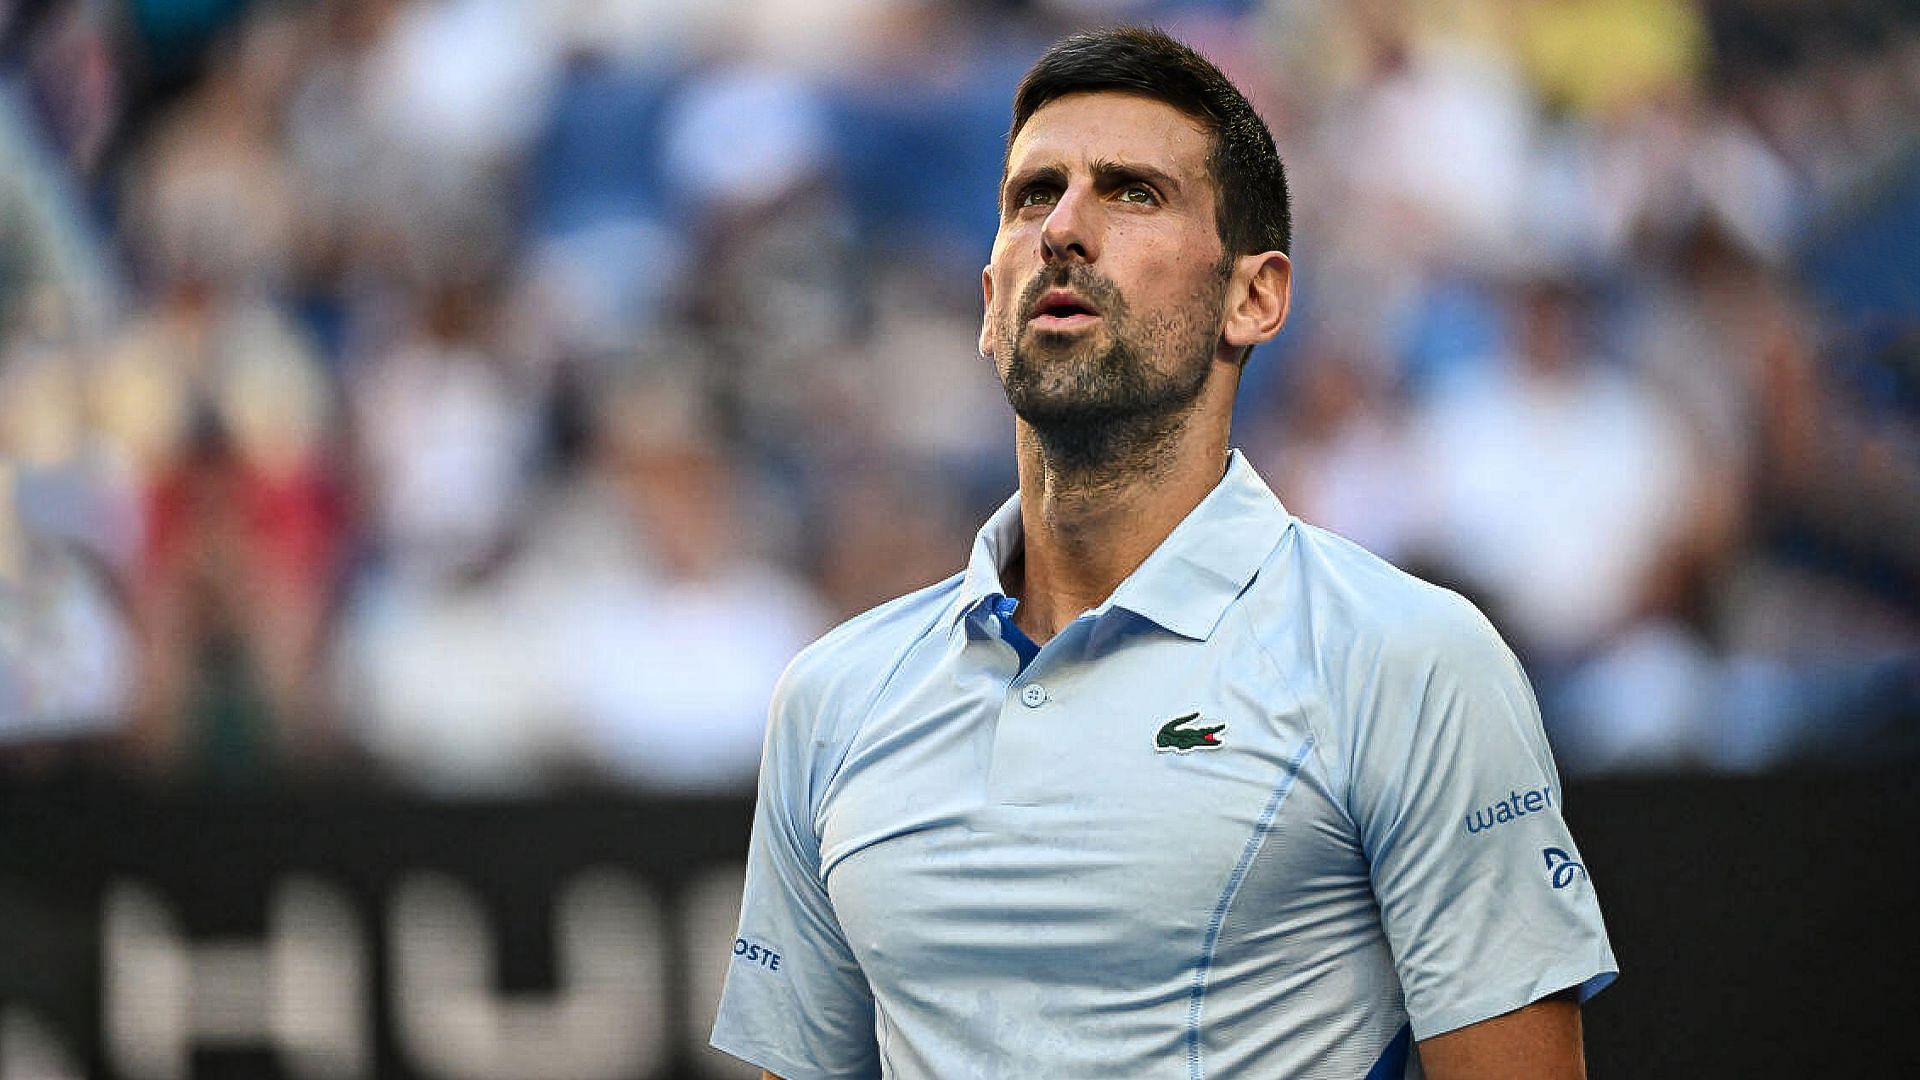 Novak Djokovic reacts after a point on the tennis court